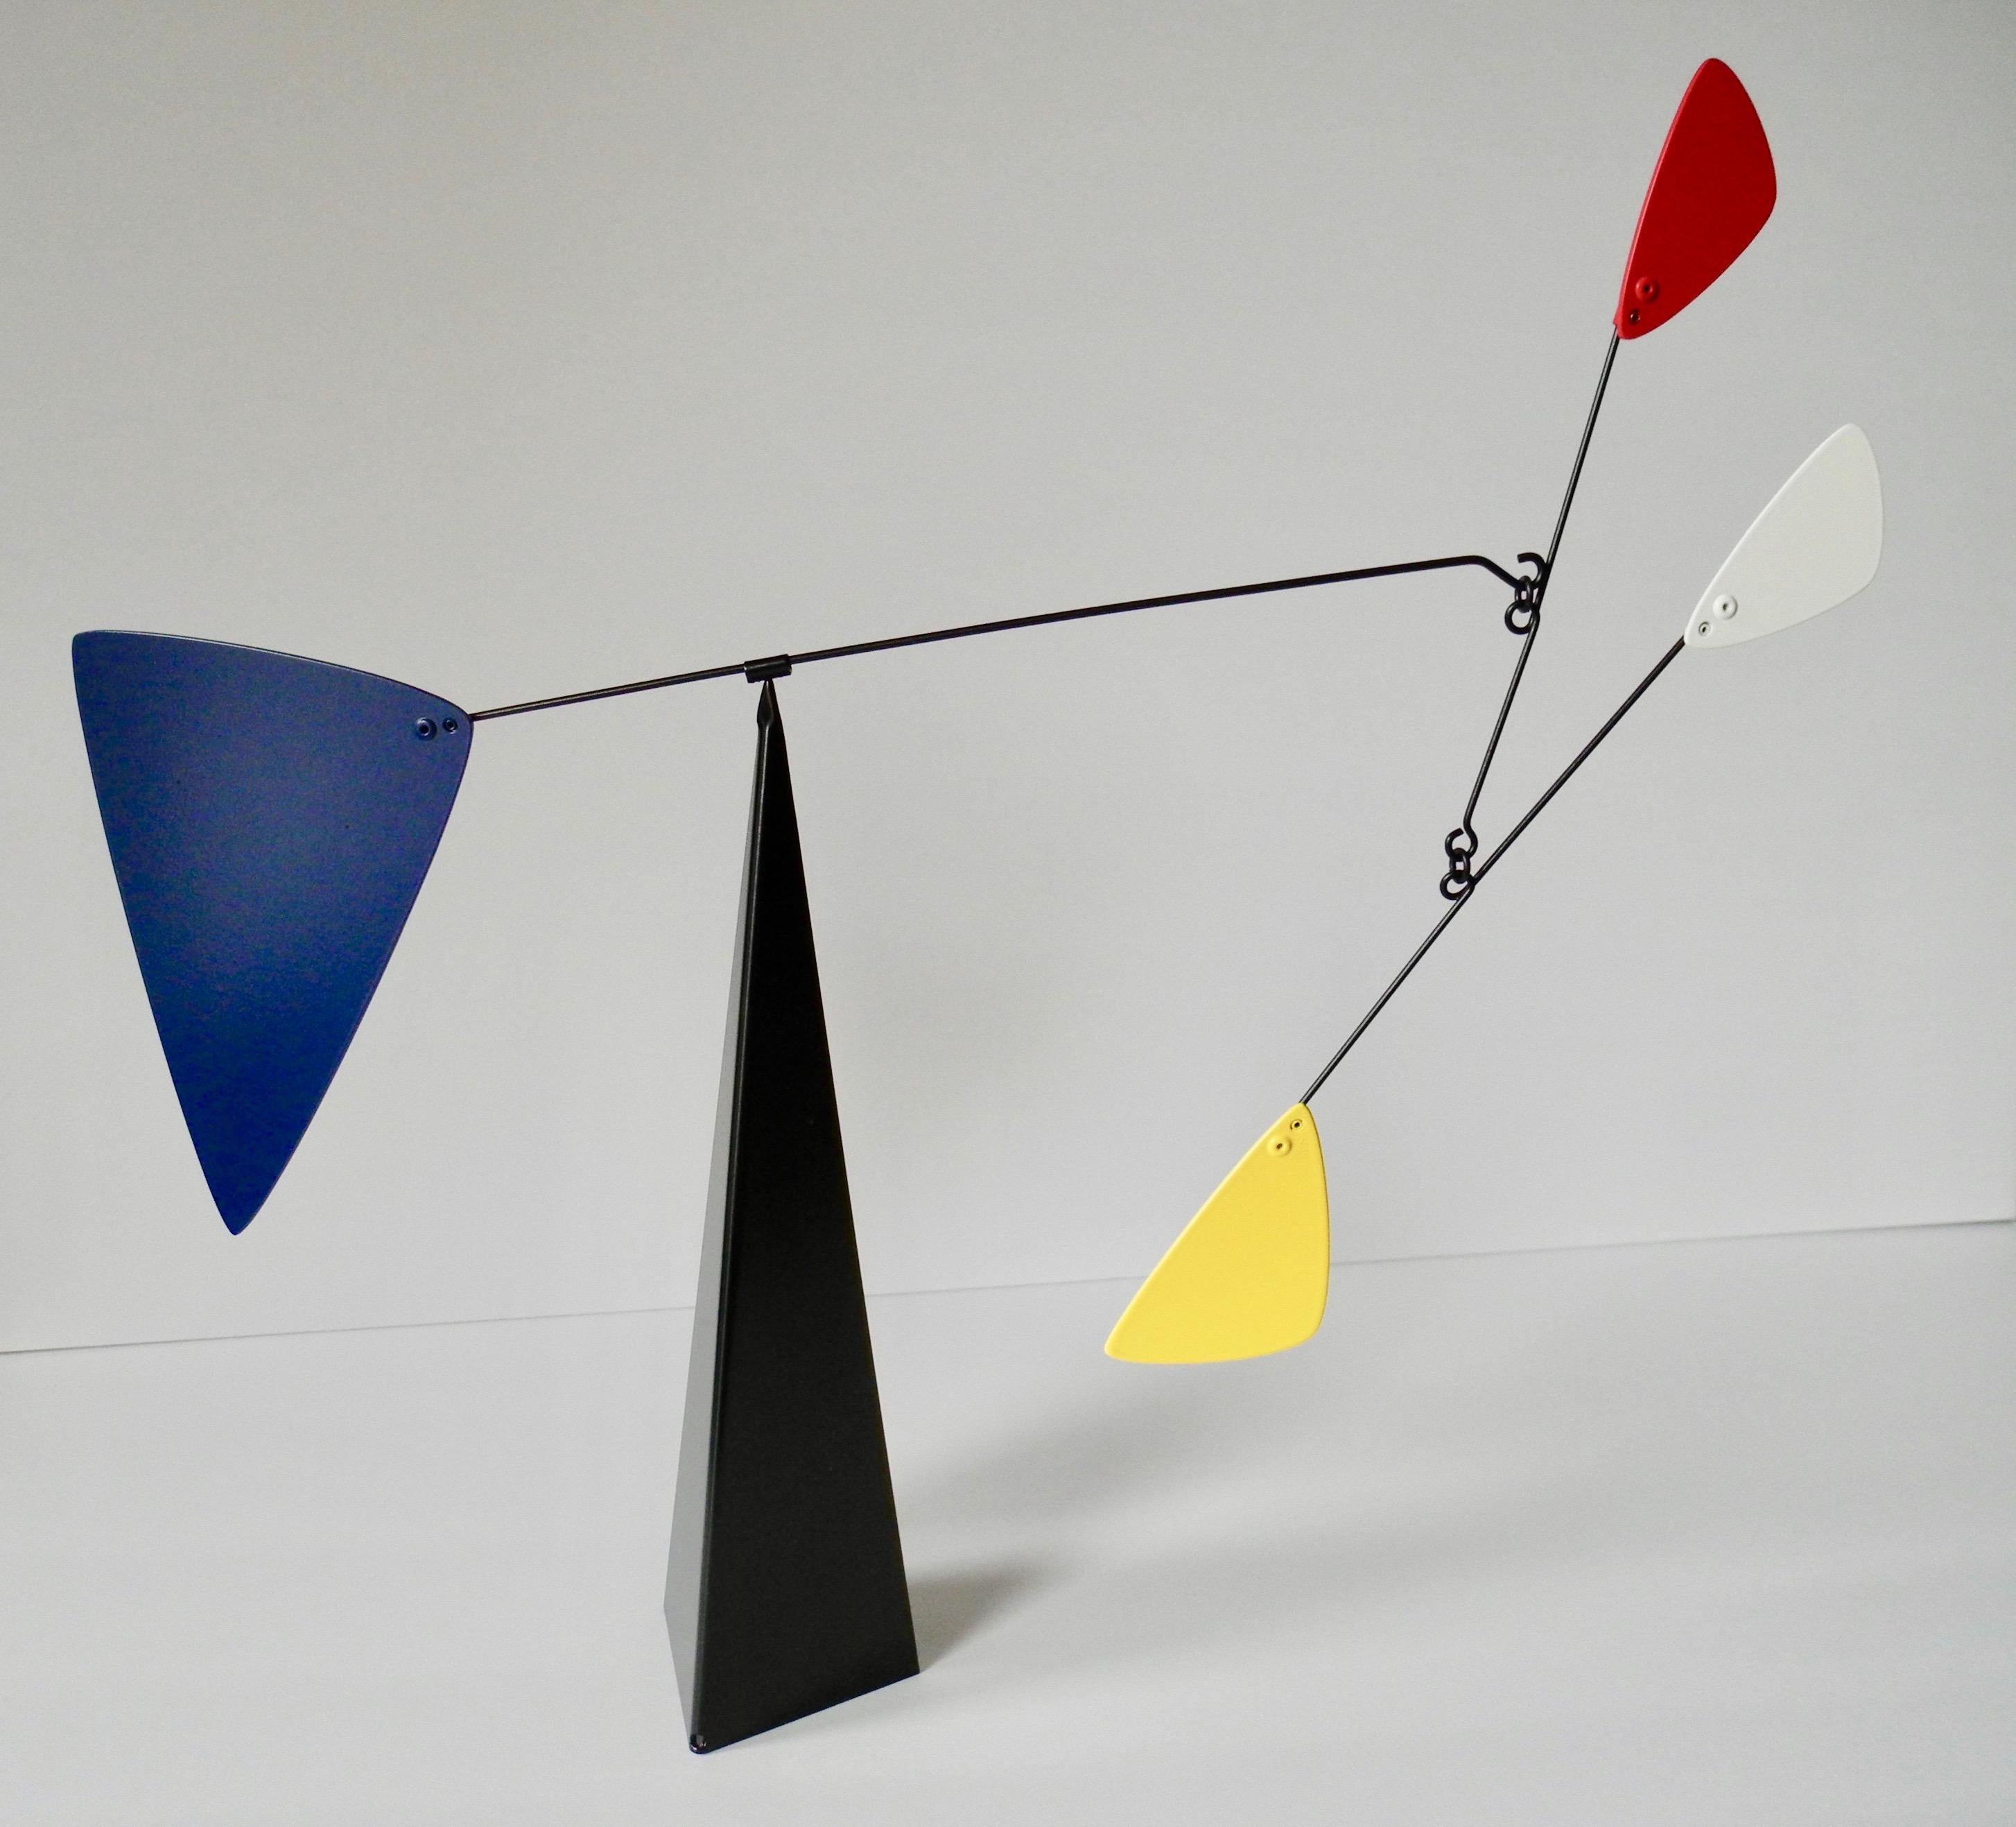 This tabletop free standing kinetic mobile is made of metal and three painted primary colors; red, yellow and blue on a black base. Very reminiscent of Alexandre Calder's sculptures and kinetic mobiles. Beautifully crafted and in like new condition.